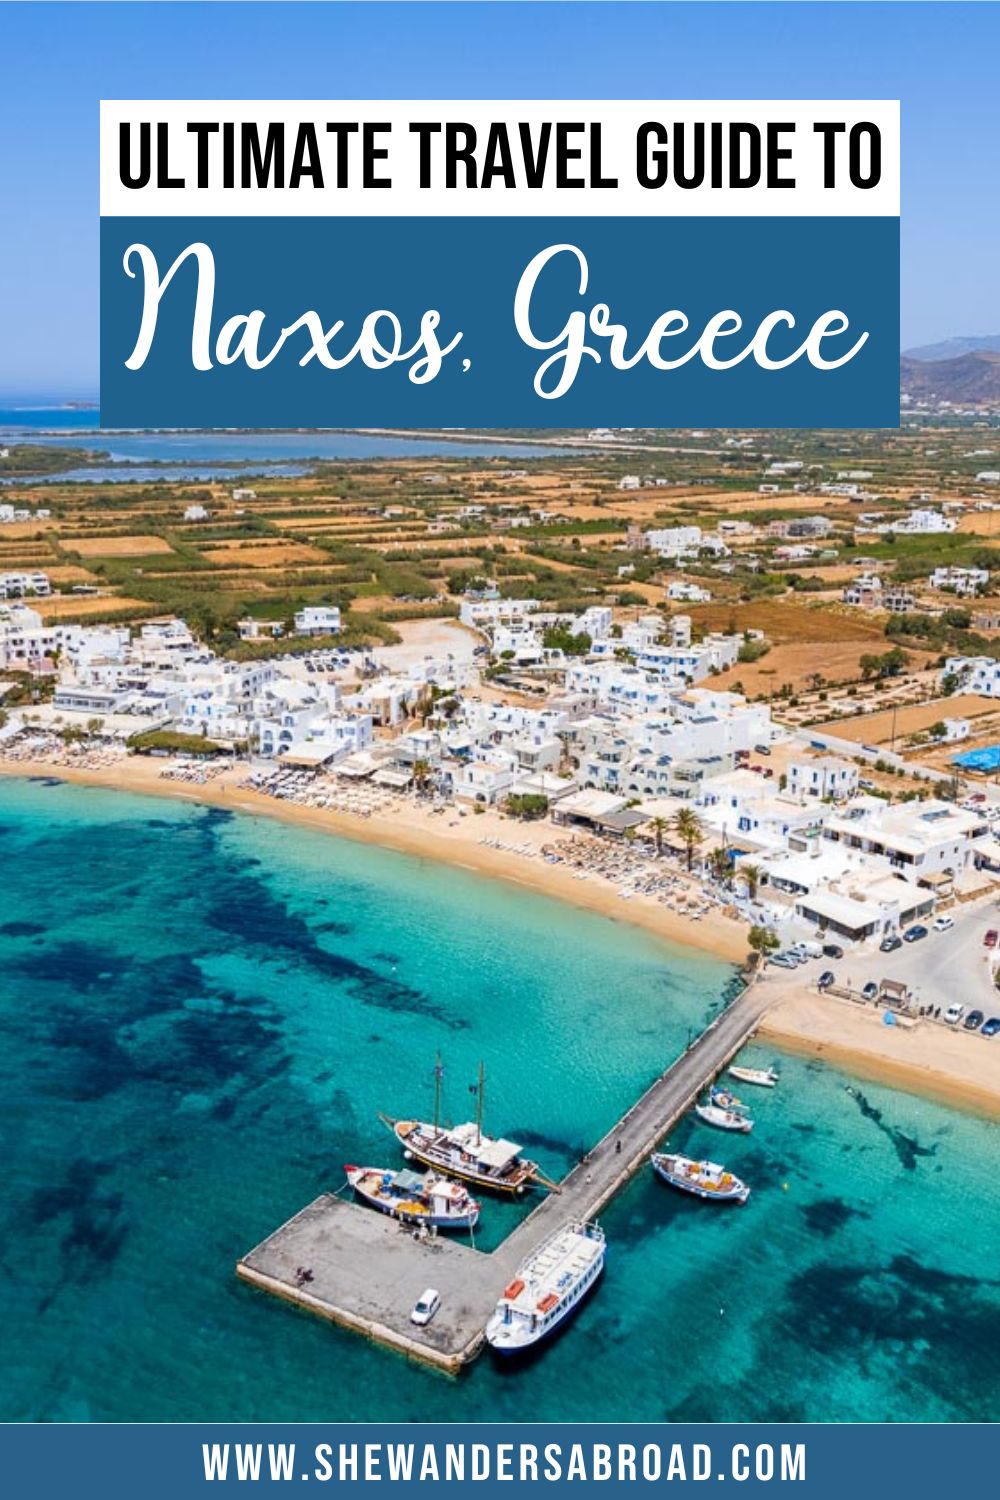 The Ultimate Naxos Travel Guide for First Timers